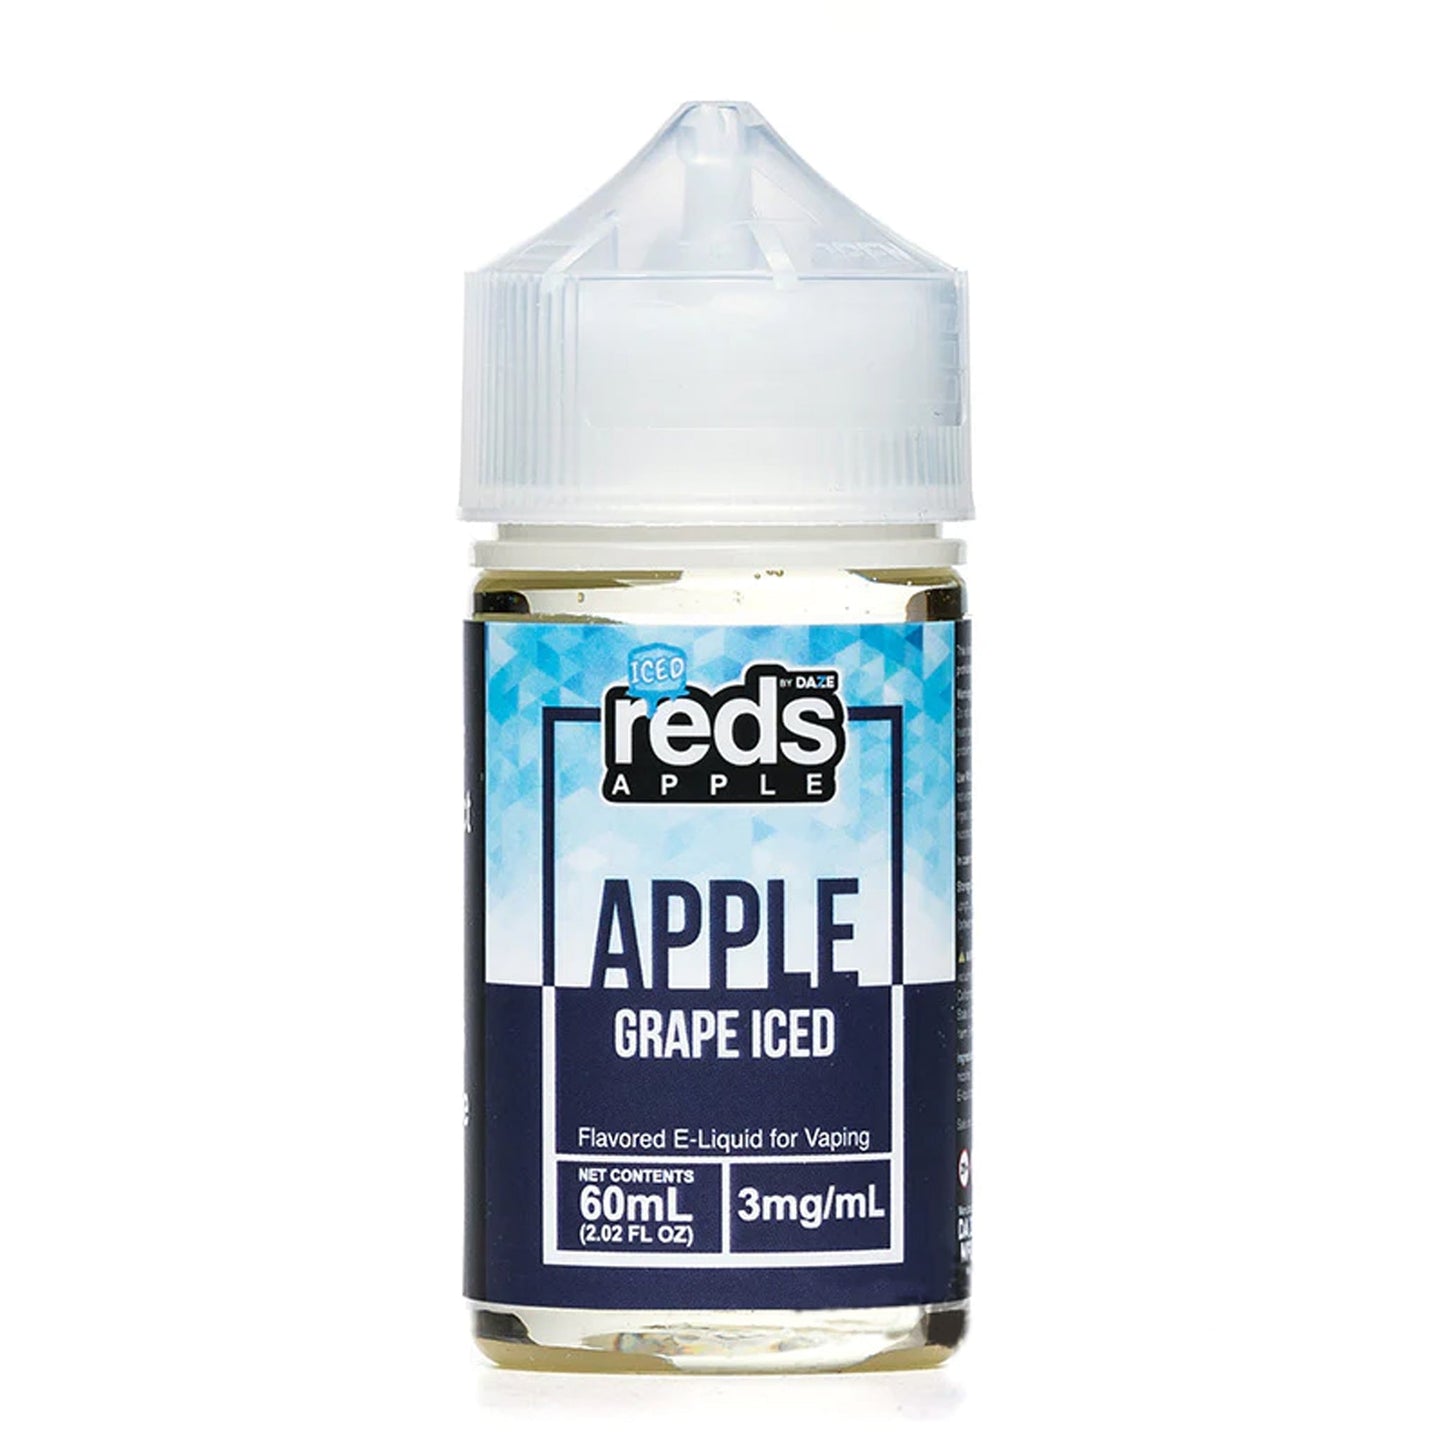 Load image into Gallery viewer, 7 Daze Reds Apple 60ML - Grape Apple Iced - Mobs Enterprise
